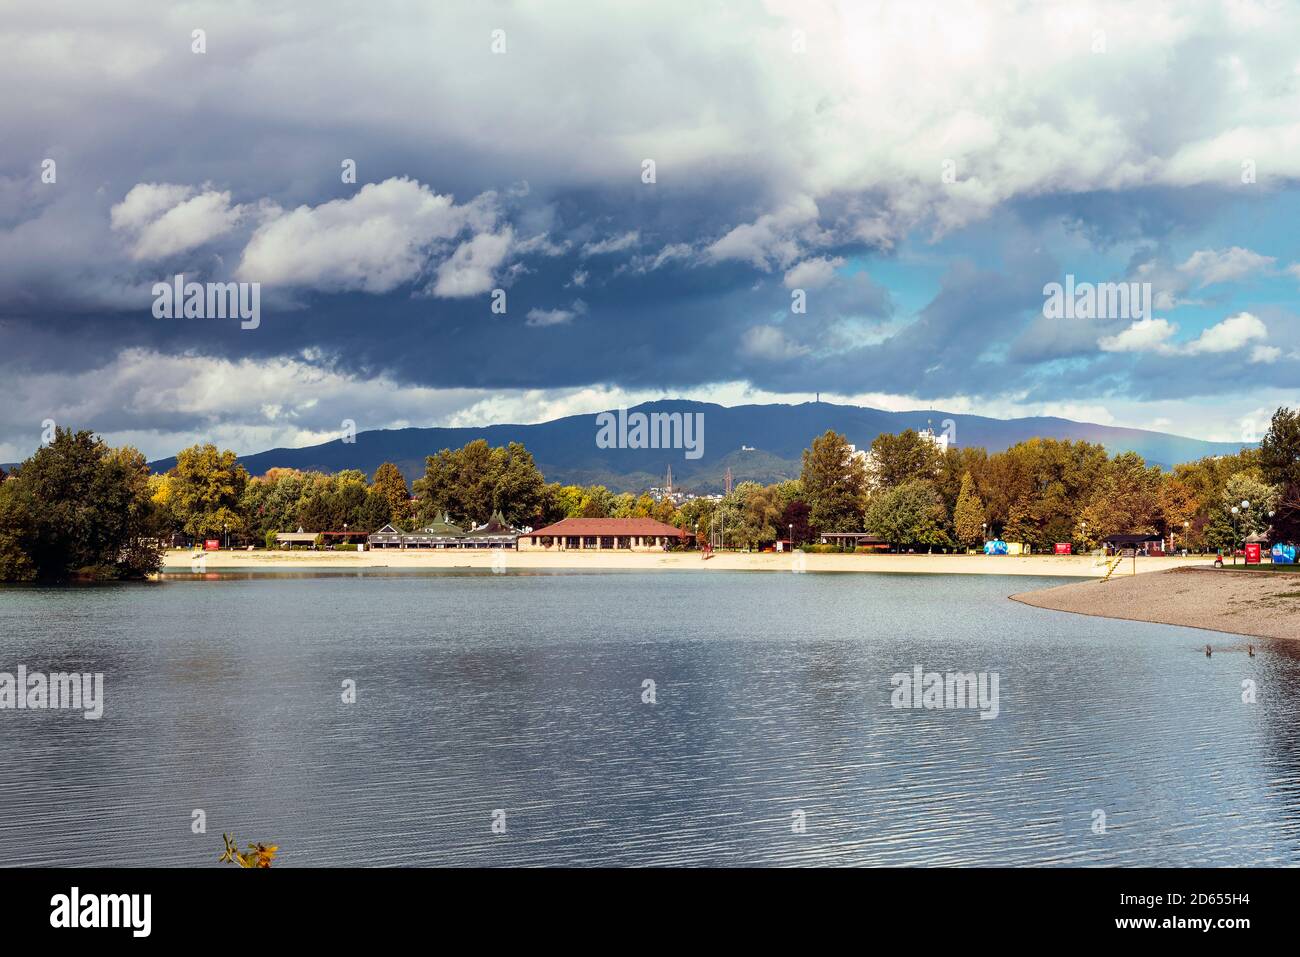 Lake and mountain against blue sky with clouds. Stormy weather. Jarun lake, Zagreb, Croatia. Stock Photo